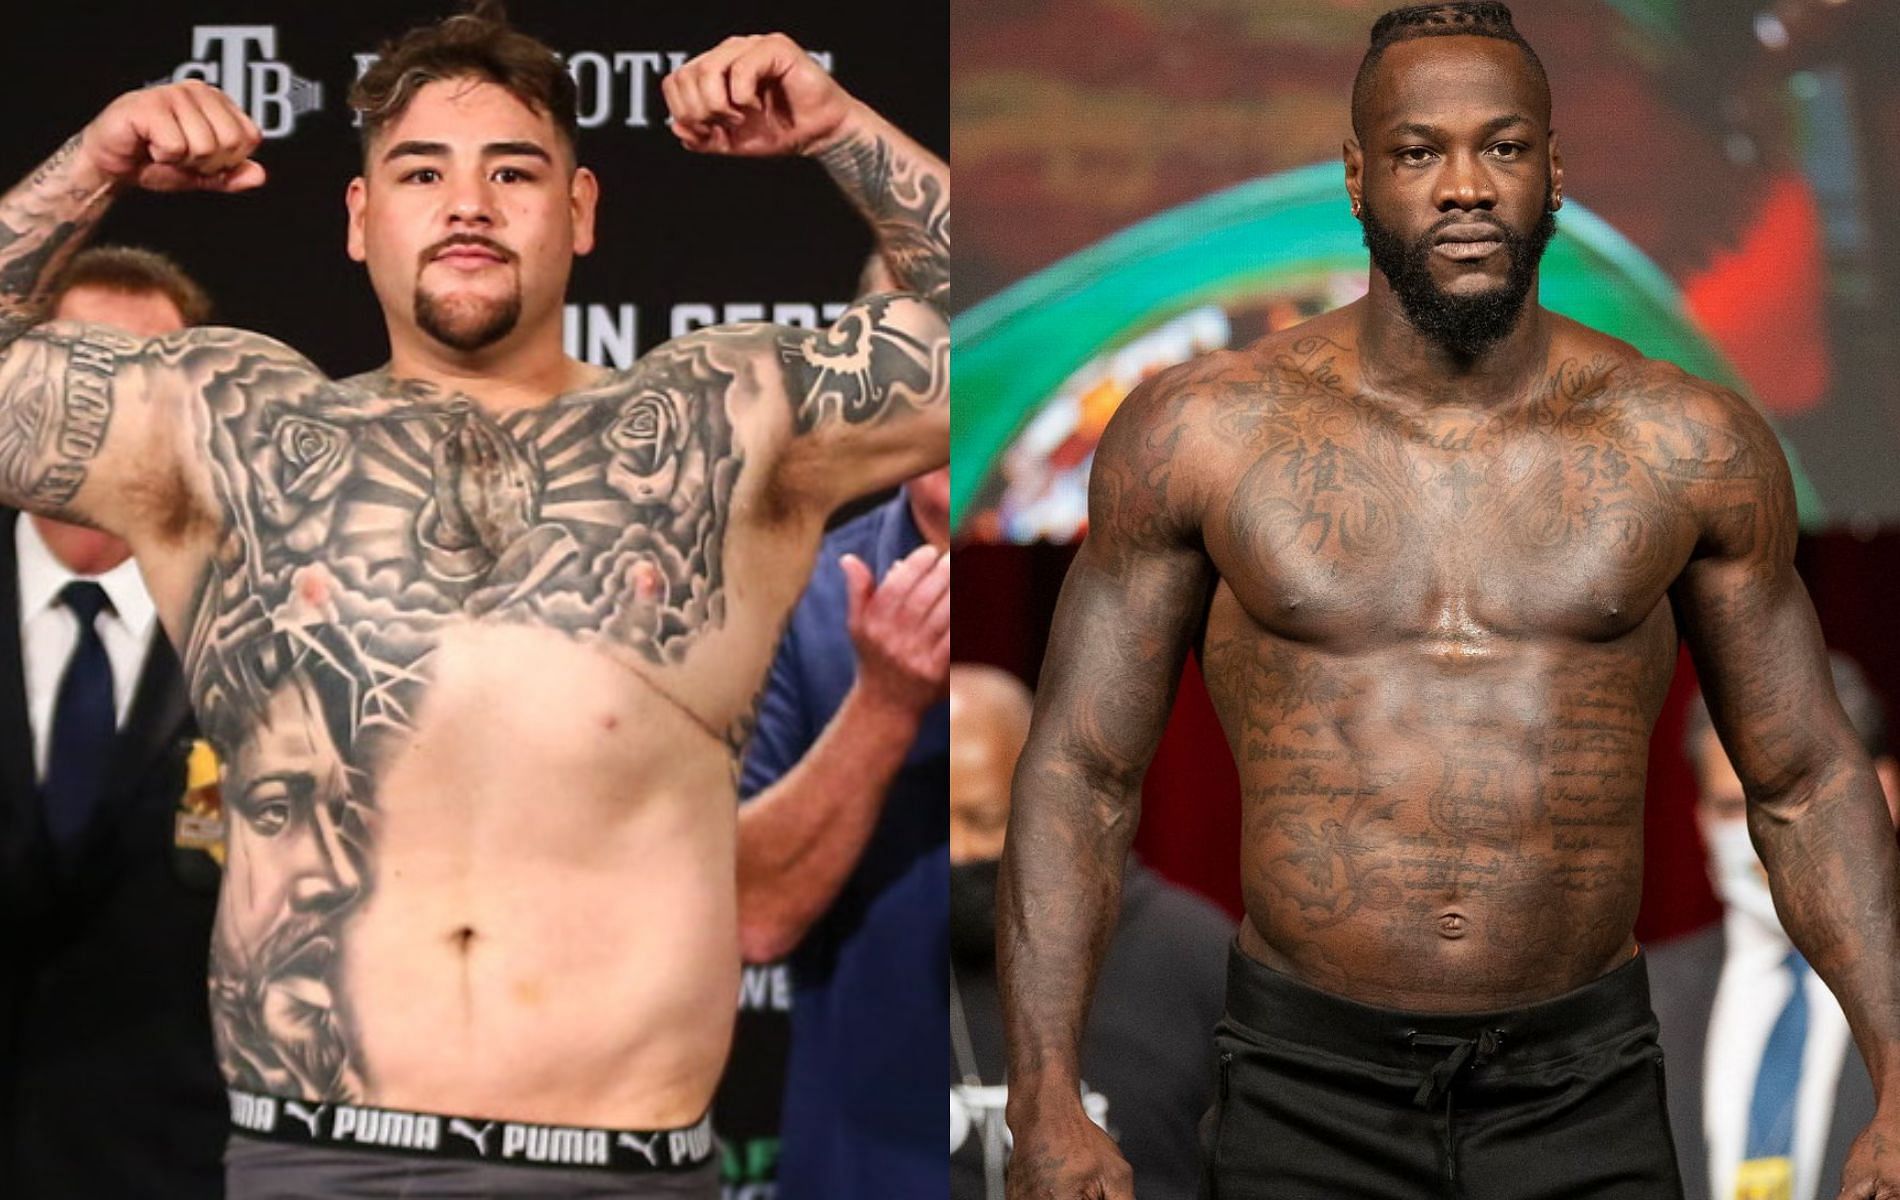 Andy Ruiz Jr. (left) and Deontay Wilder (right)